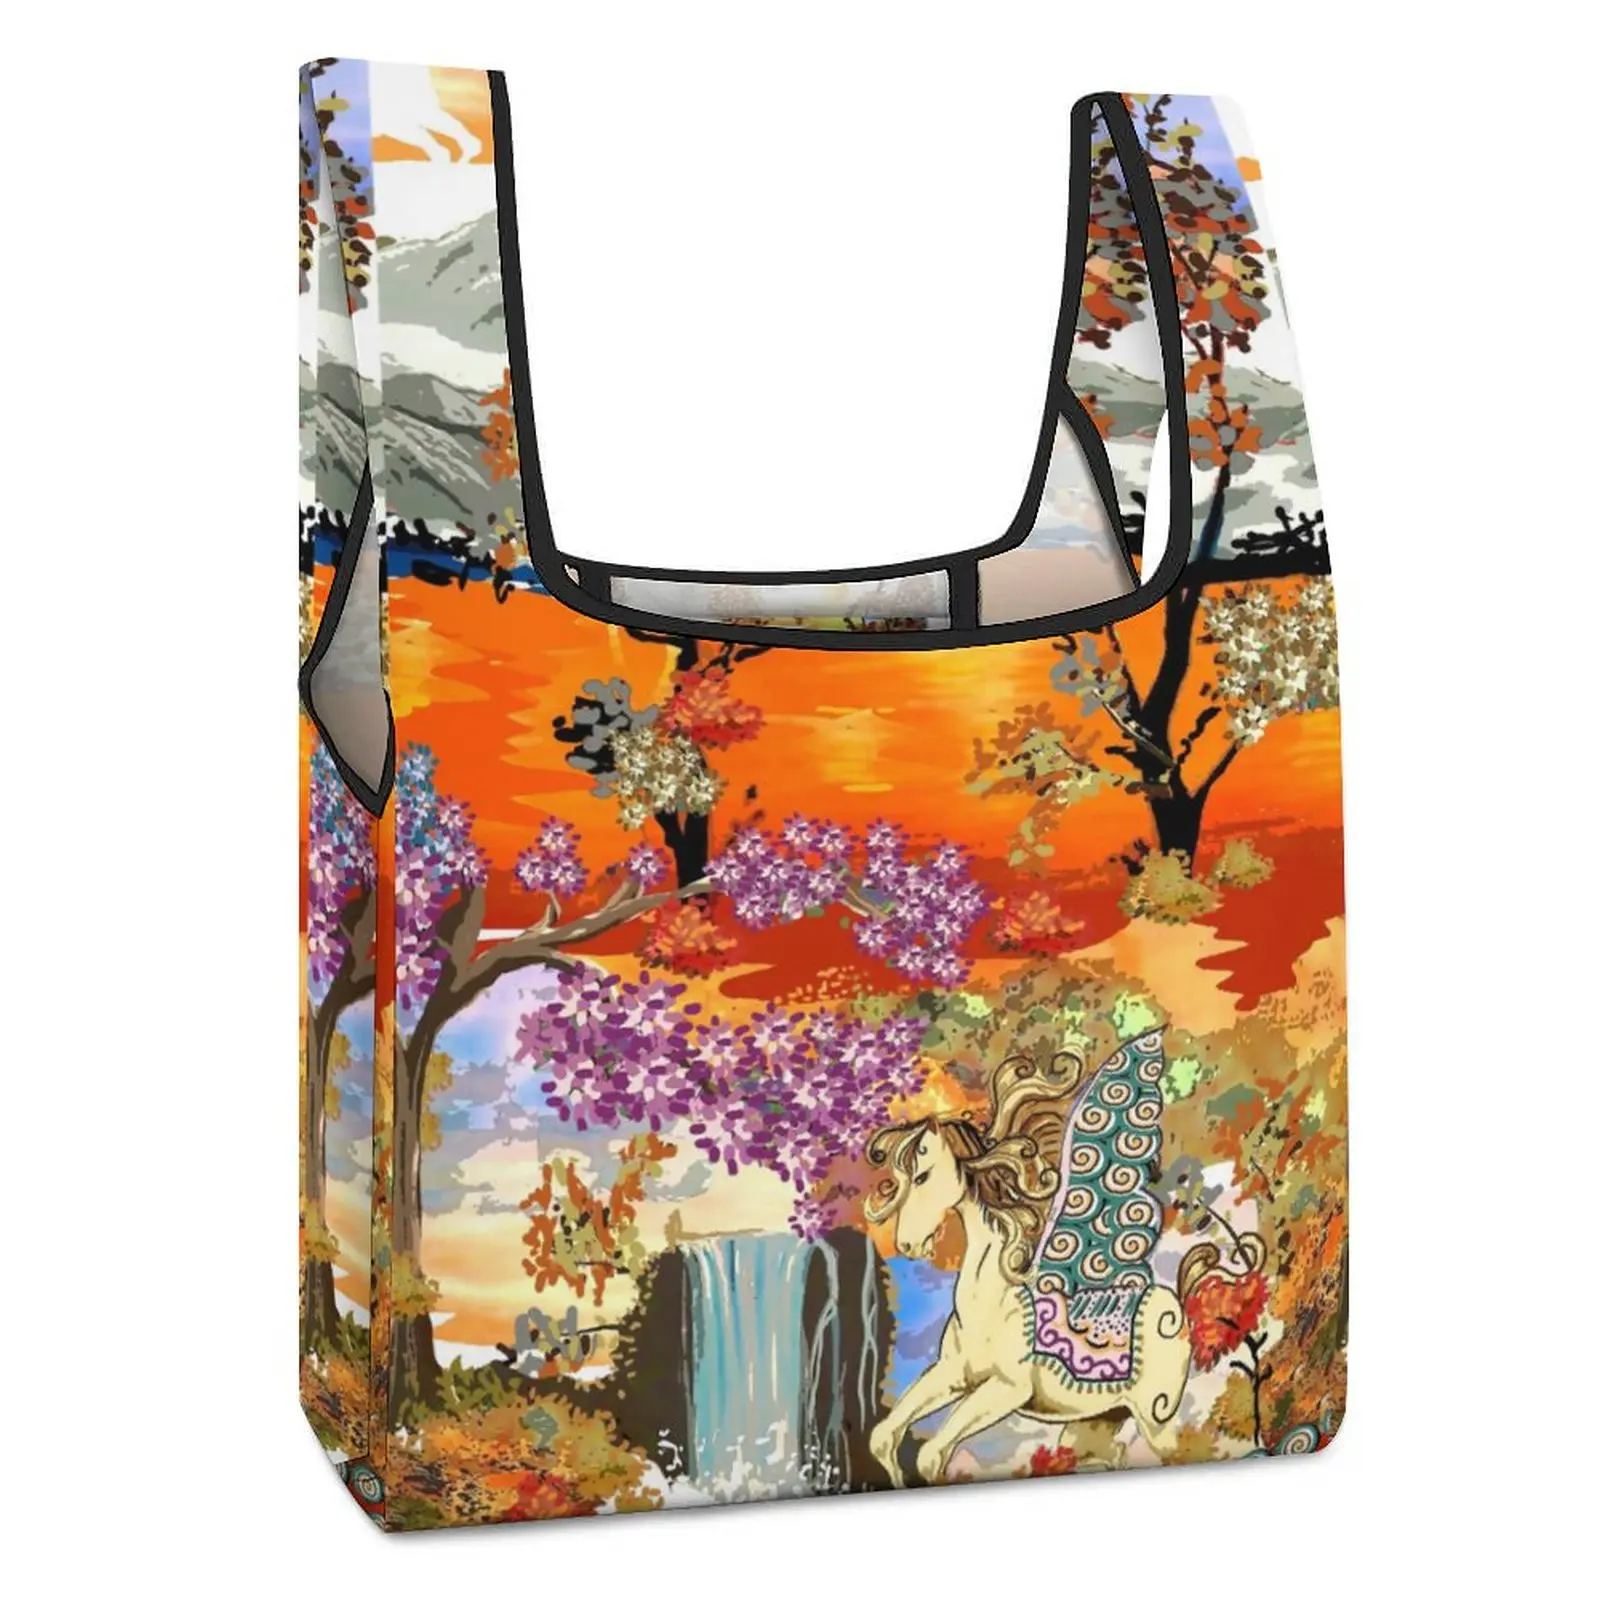 Customized Printed Collapsible Shopping Bag Double Strap Handbag Colored Printing Tote Casual Woman Grocery Bag Custom Pattern customized printed bags shopper shoulder bag ethnic retro style shopping tote casual woman grocery handbag customizable pattern